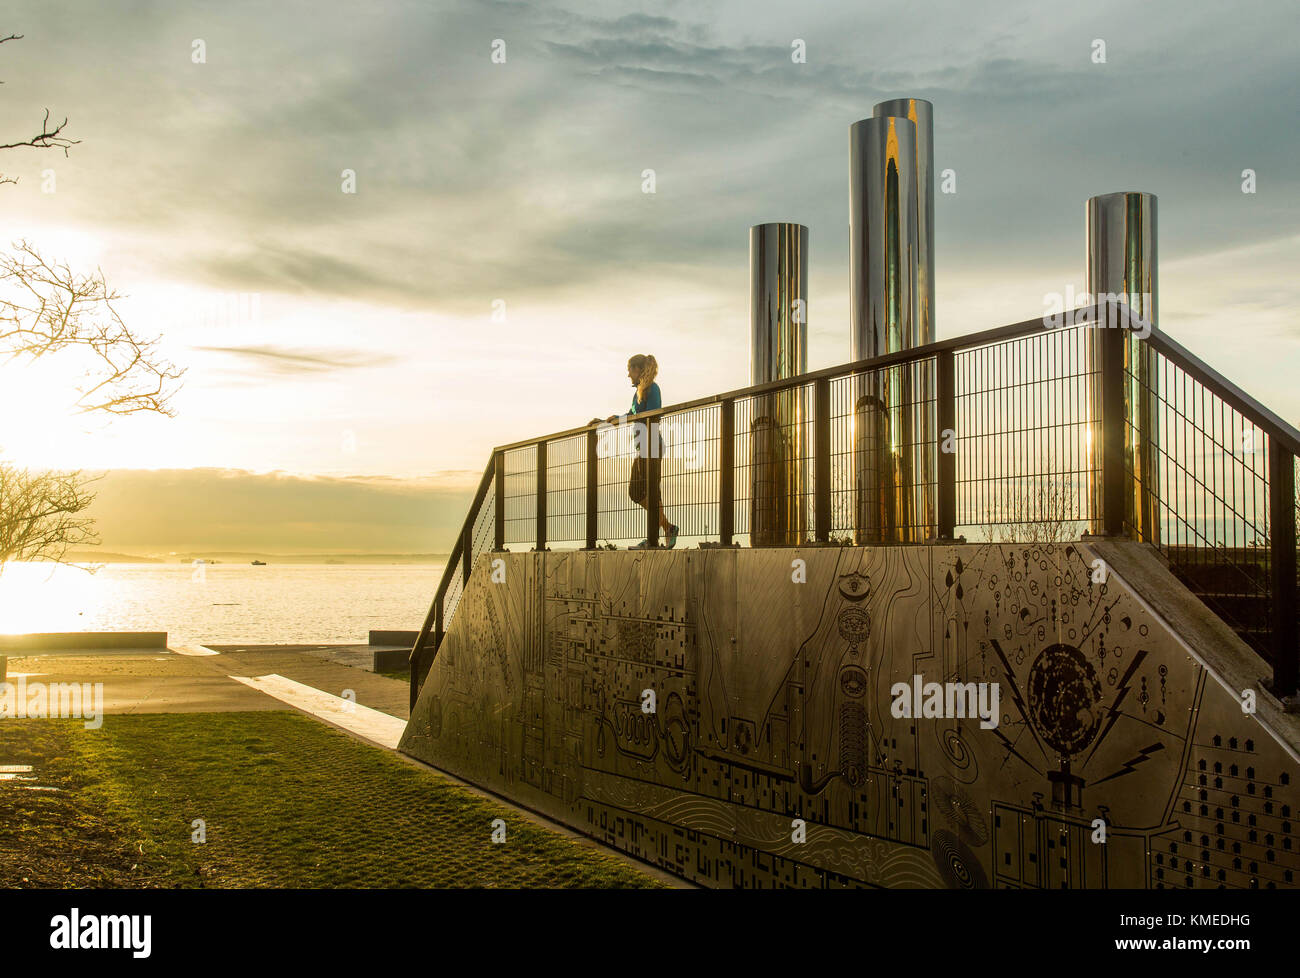 A runner takes a break and rests on an urban sculpture in downtown Seattle along the edge of the Puget Sound. Stock Photo